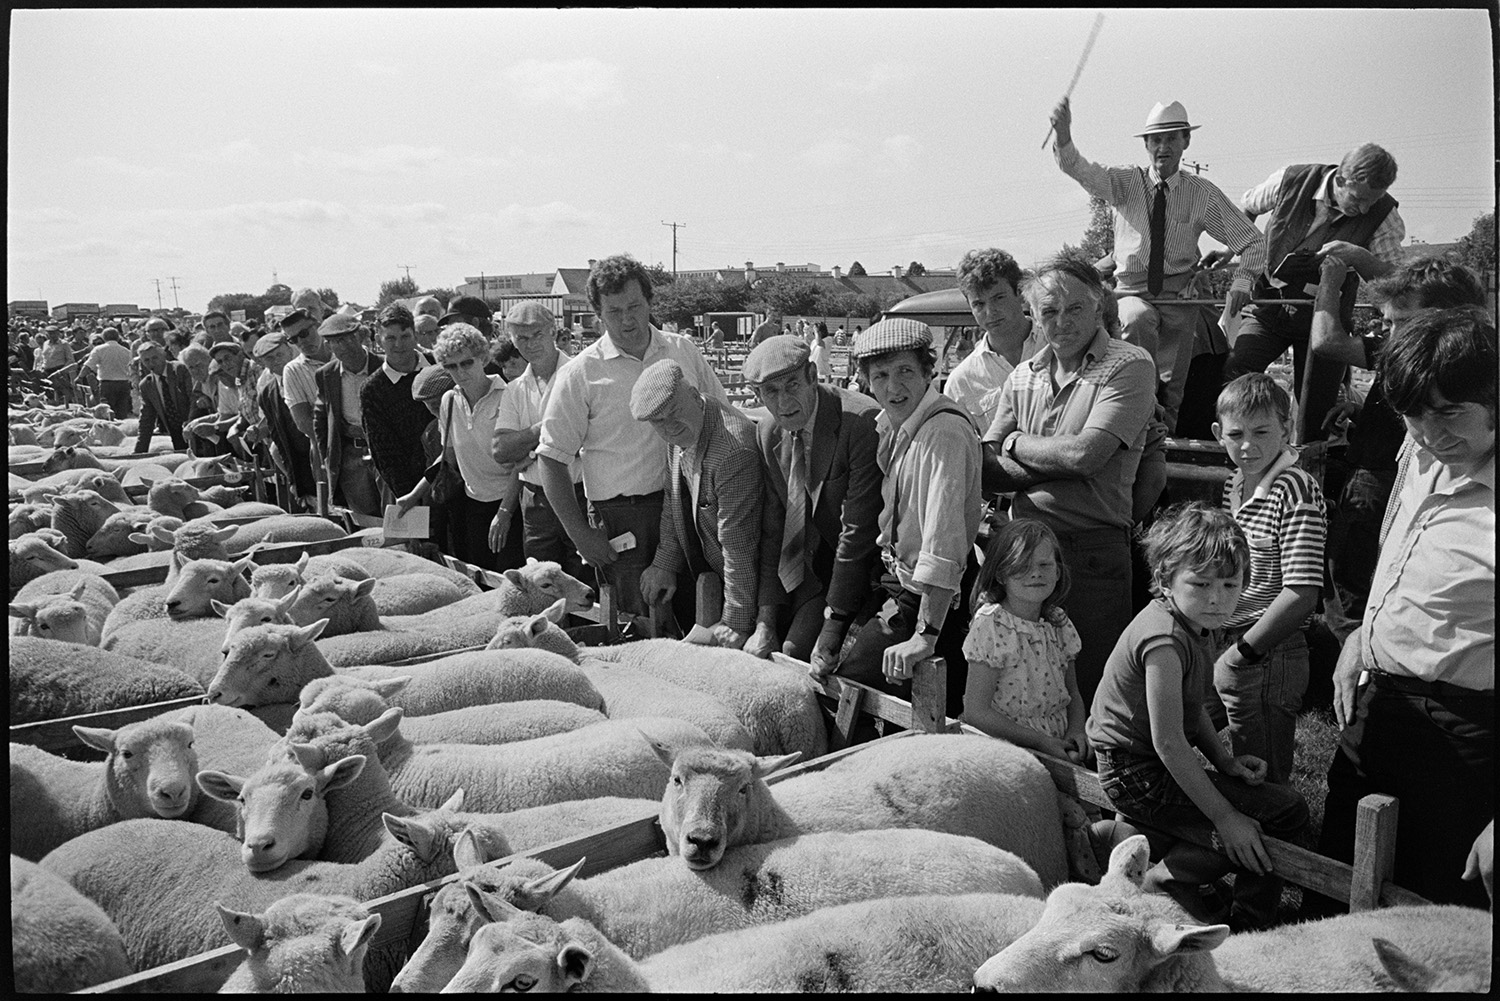 Sheep fair, farmers, auctioneers moving along pens of sheep on hot day. 
[Men, women and children looking at sheep in pens at South Molton Sheep Fair. The auctioneer is stood in the background taking bids.]